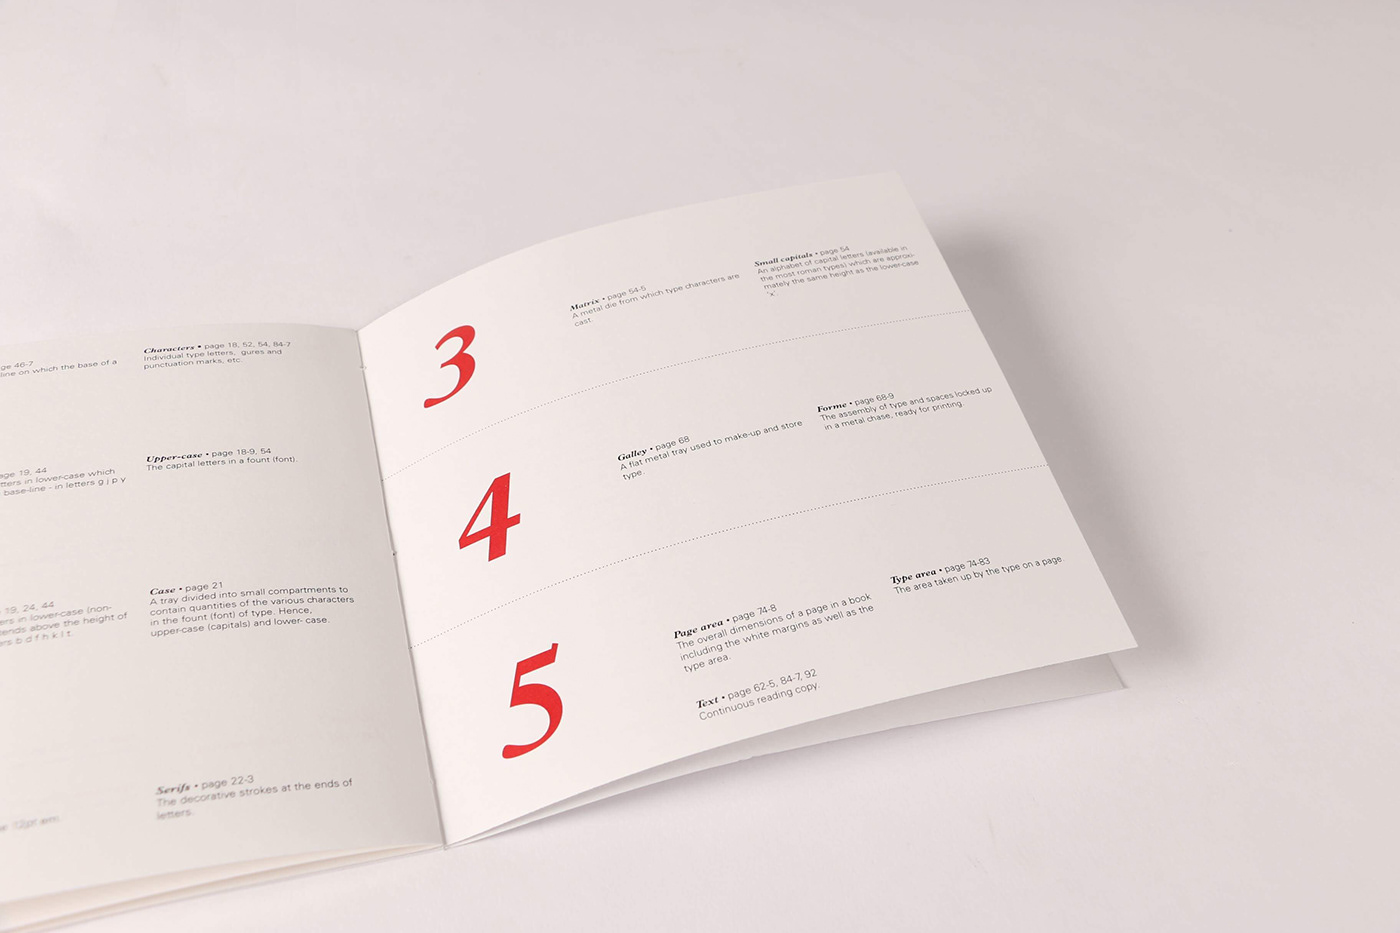 A booklet exploring typographic restrictions